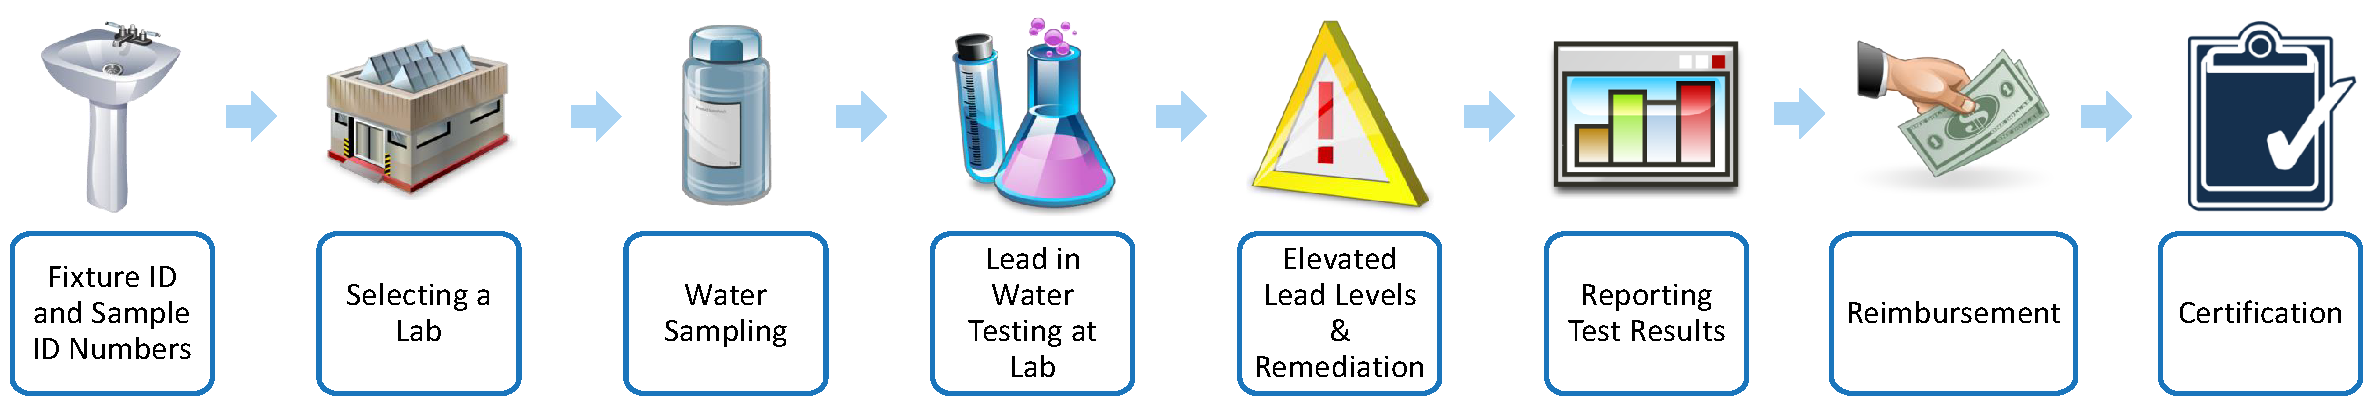 Lead in water testing process flow chart. 1: Fixture and sample ID numbers, 2: Selecting a lab, 3: Water sampling, 4: Lead in water testing at lab, 5: Elevated lead levels and remediation, 6: Publishing test results, 7: Reimbursement, 8: Certification